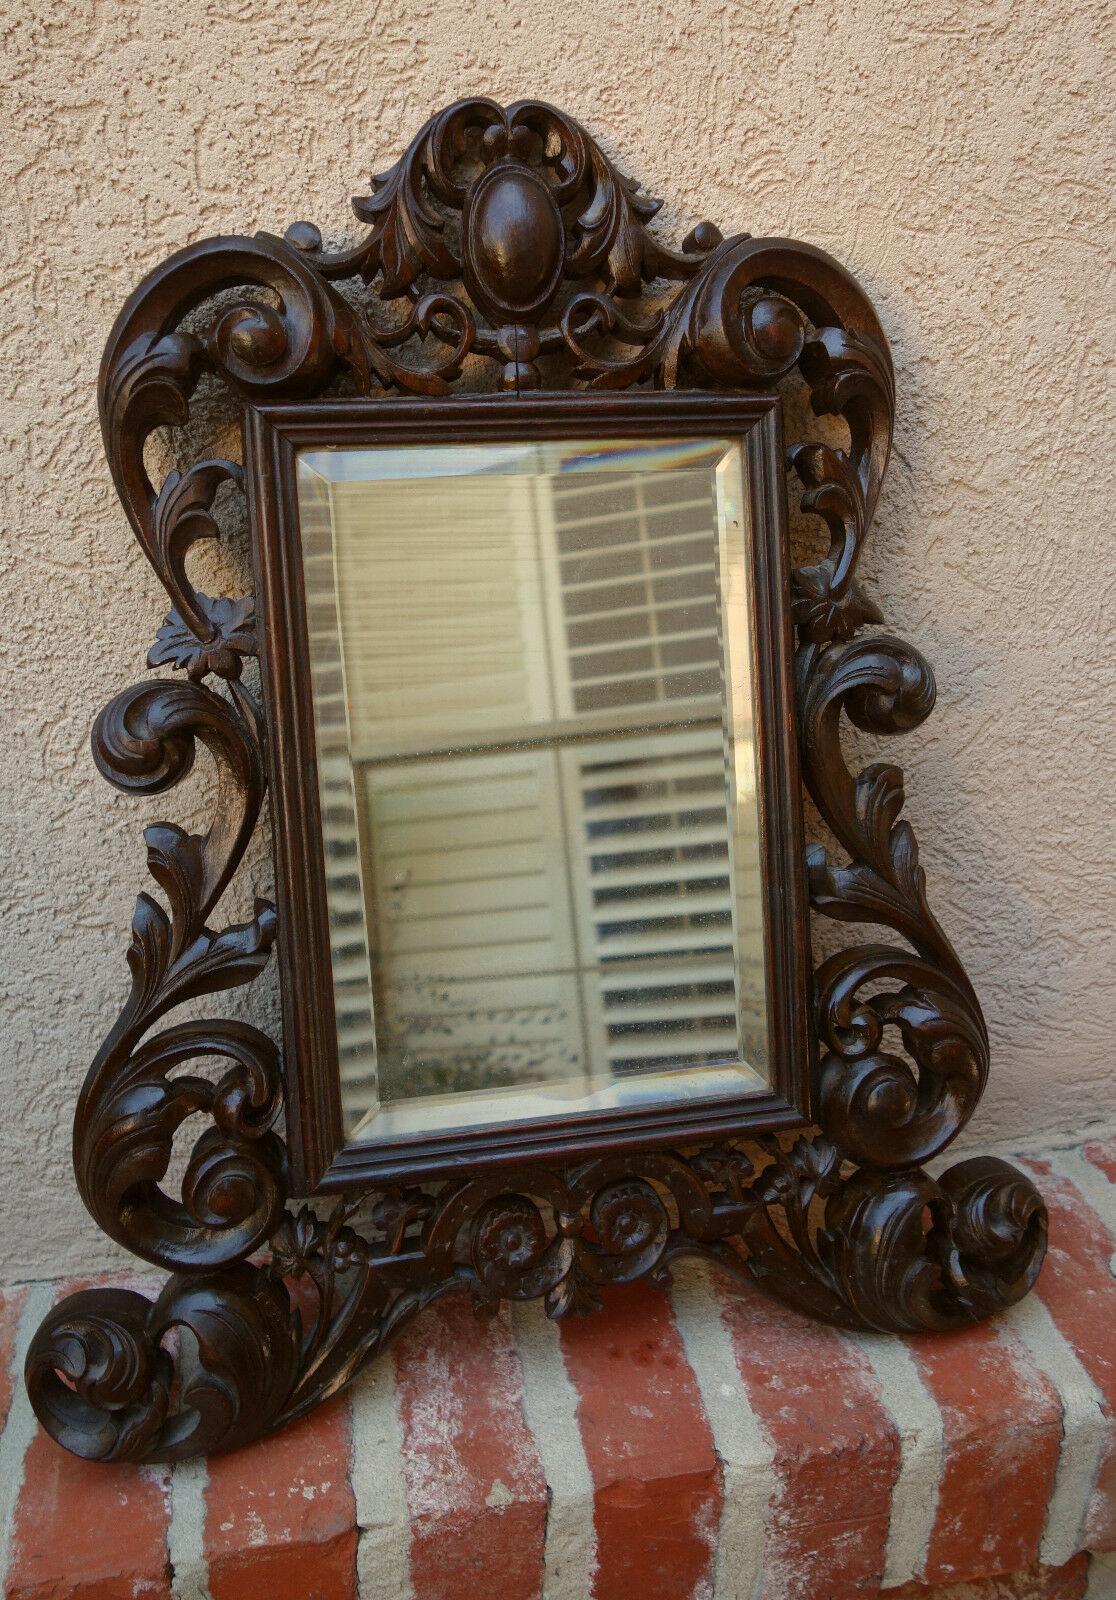 ~ Direct from France
~ Another fabulous antique French beveled wall mirror!
~ Very unique style, an unusually shaped design that just “speaks French”!
~ Lavish open carved scroll designs with large oval medallion crown
~ Rich dark finish and lovely